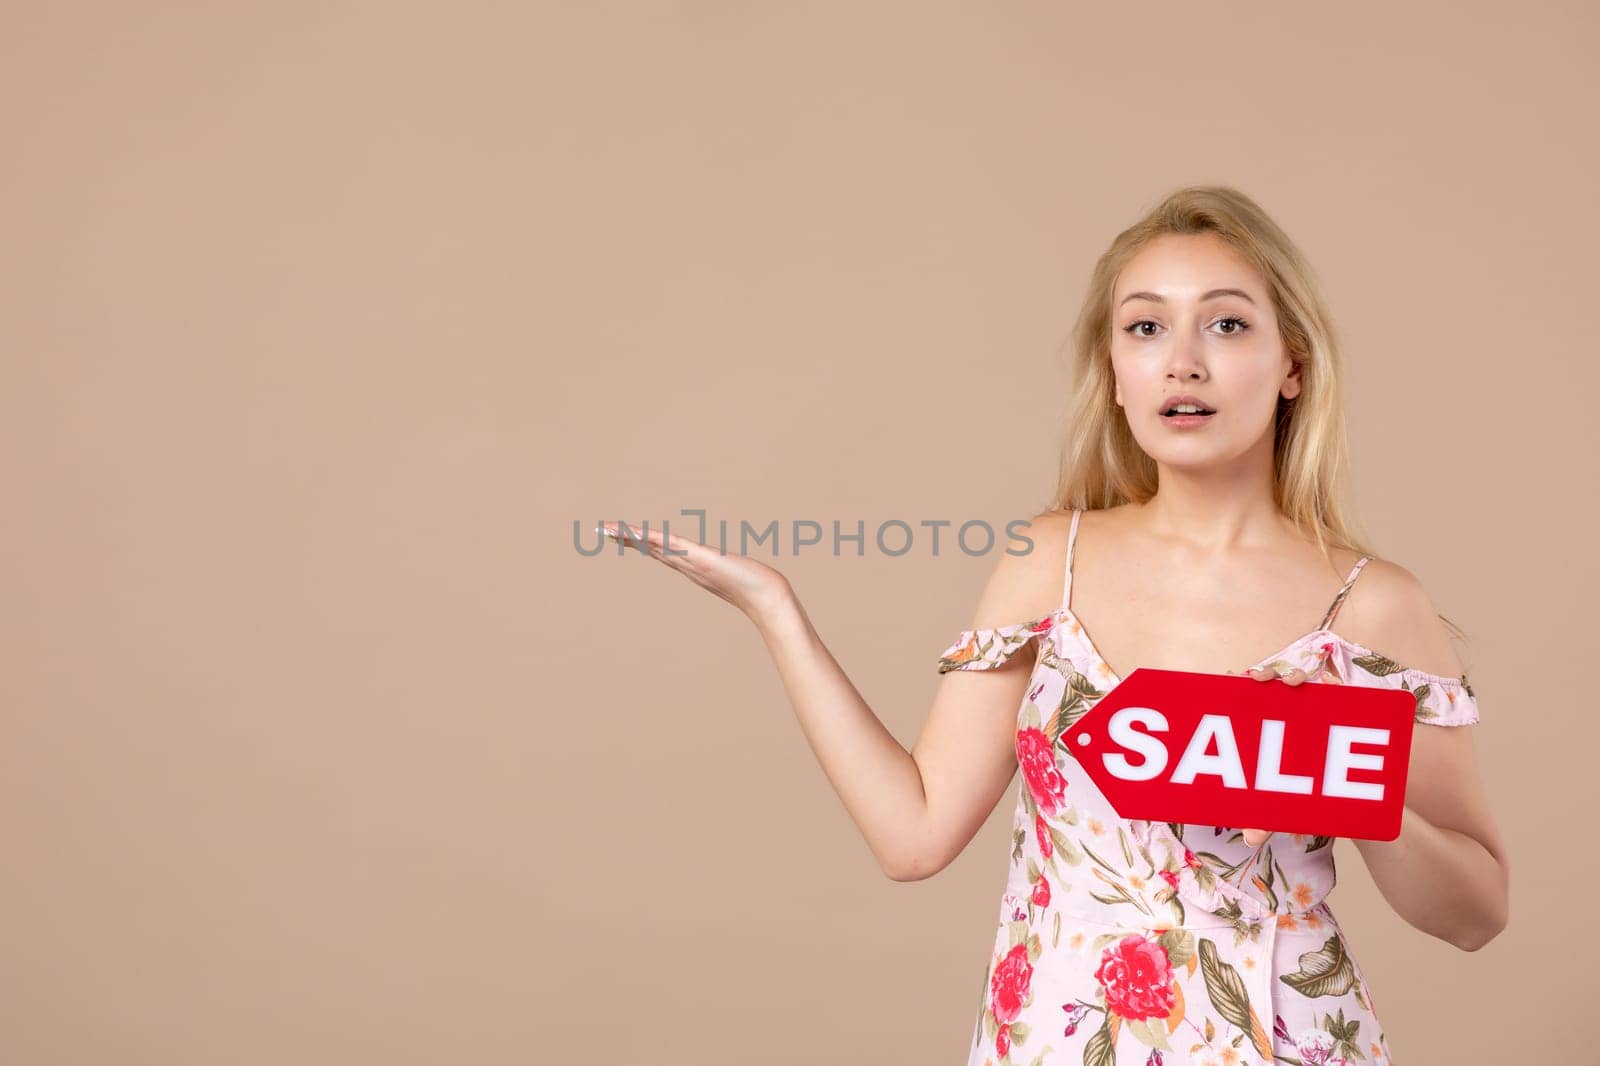 front view young female holding red sale nameplate on brown background money march horizontal sensual shopping woman equality feminine